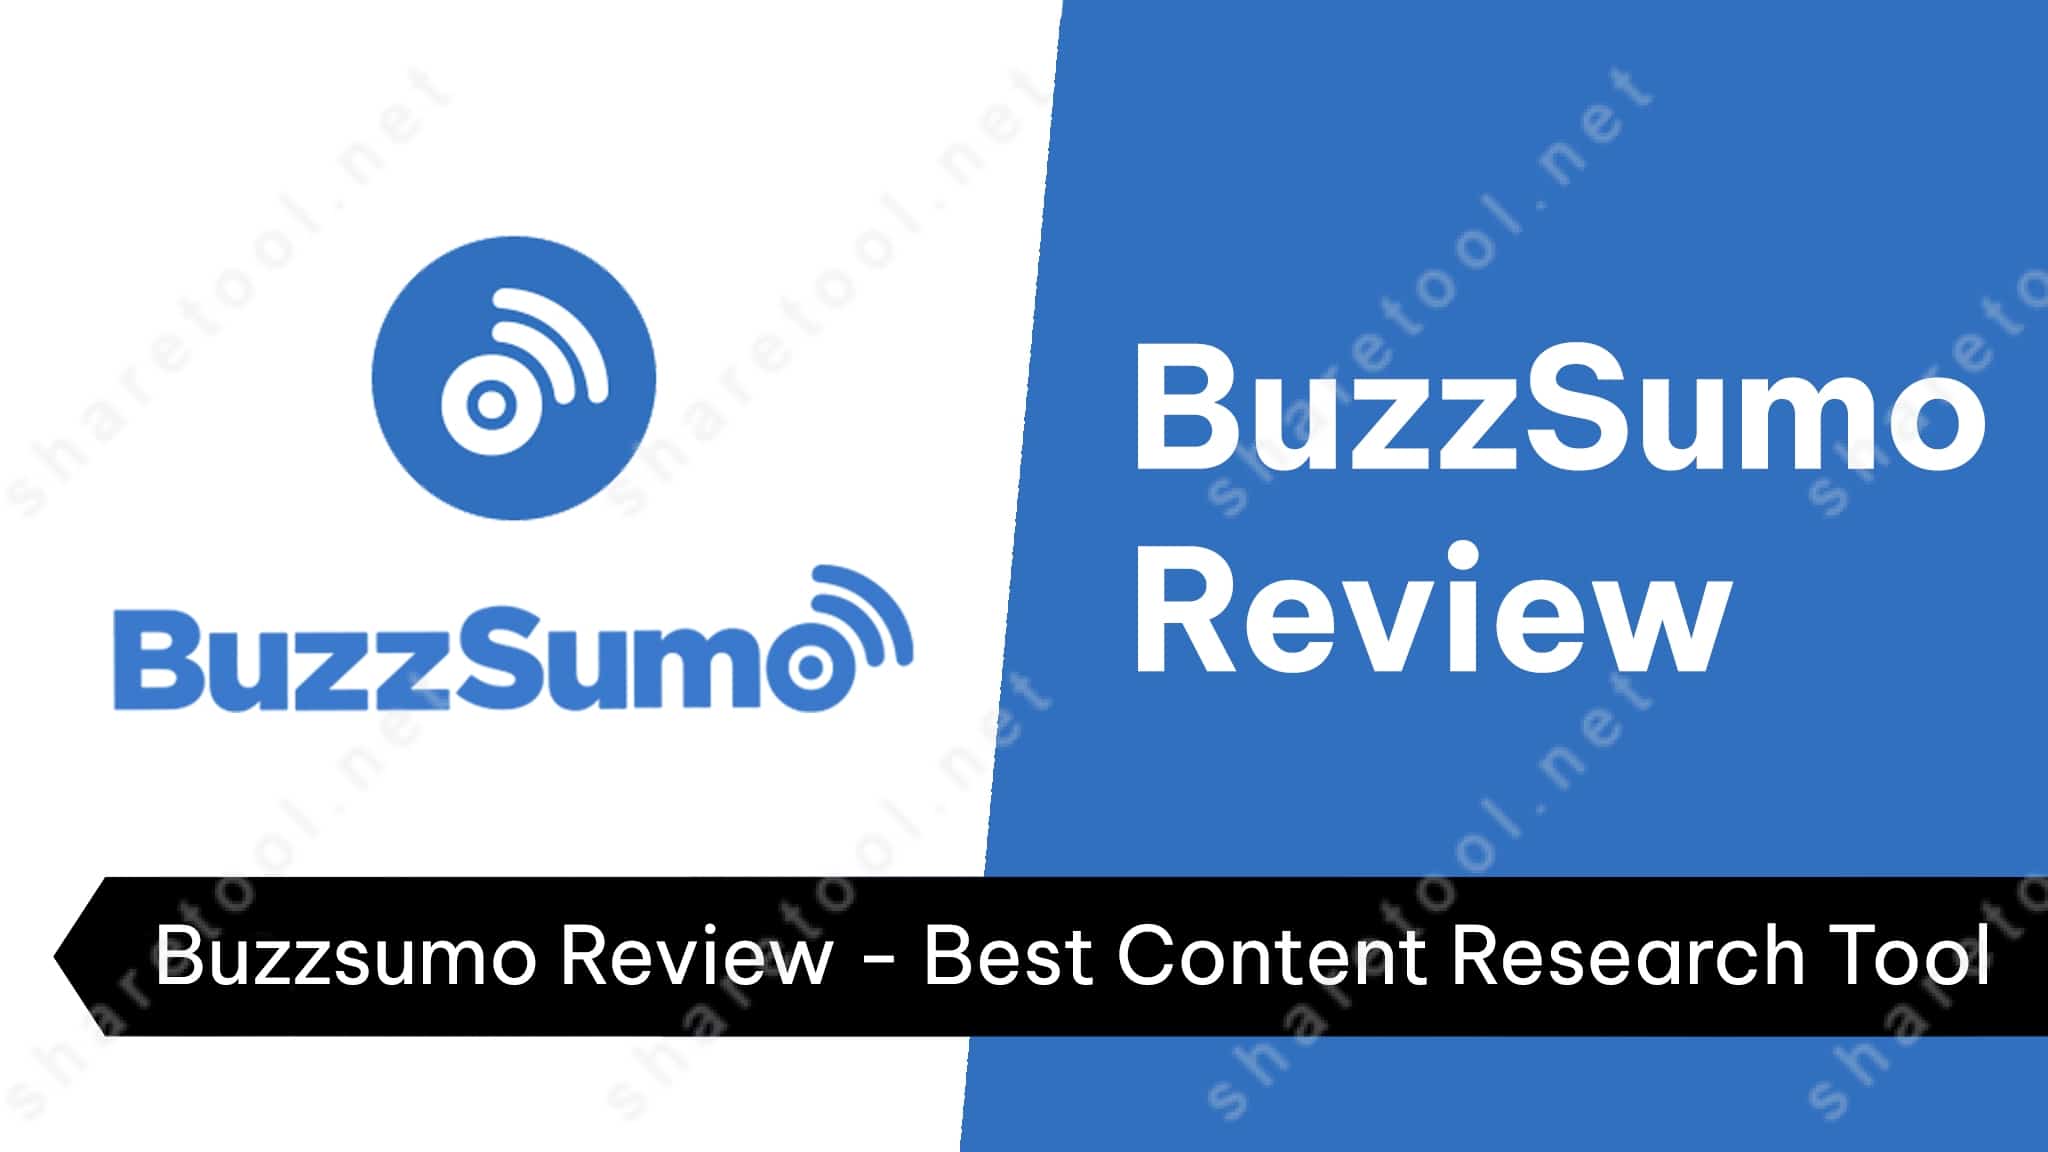 Buzzsumo Review - Best Content Research Tool